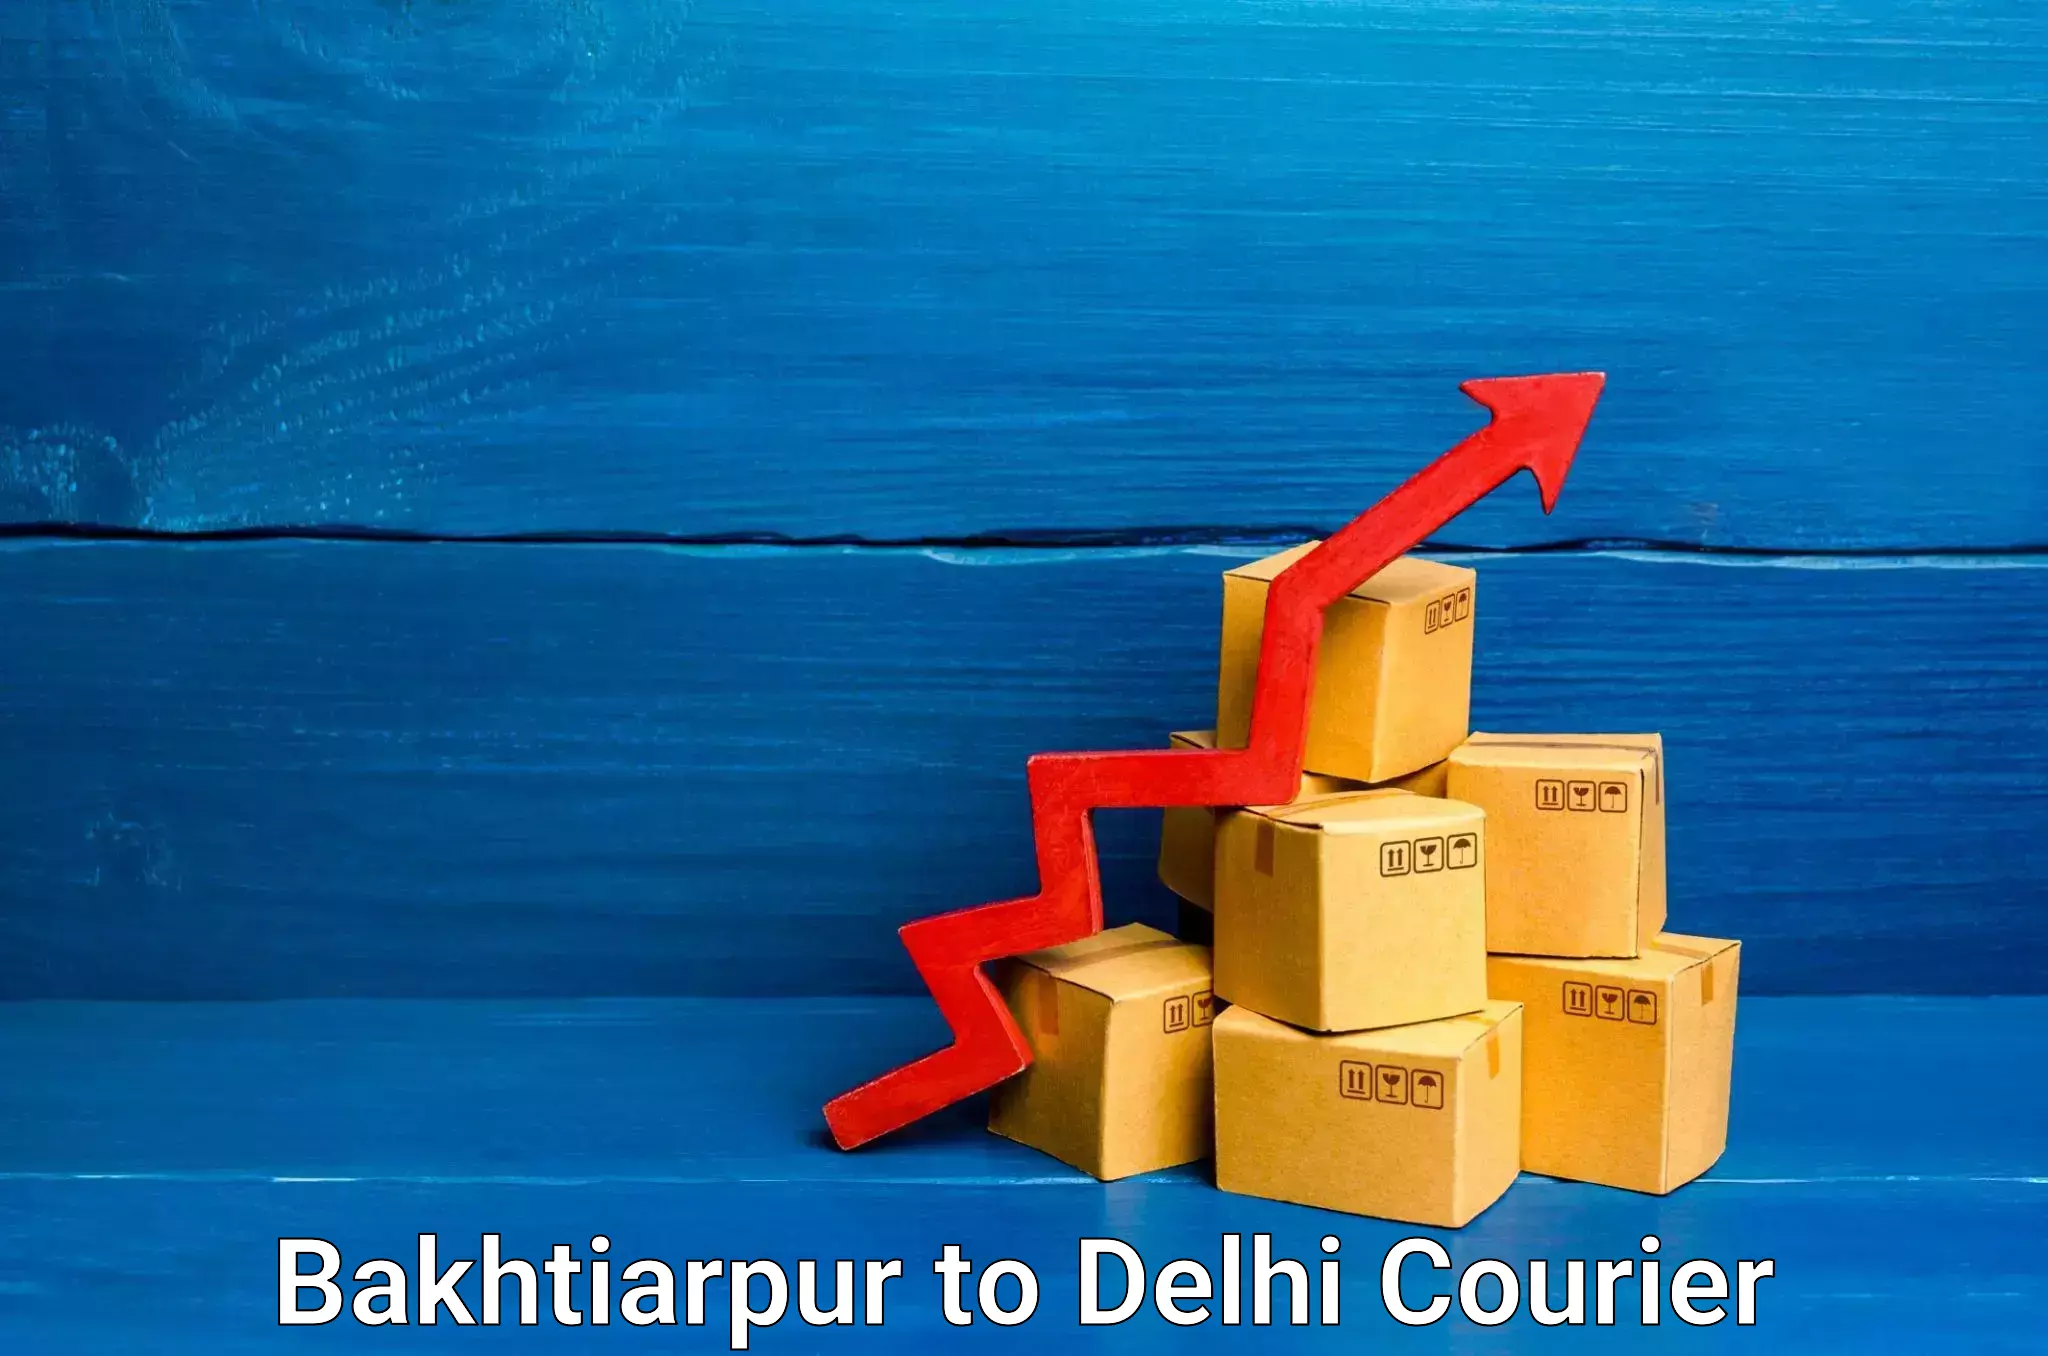 Efficient moving company Bakhtiarpur to NCR